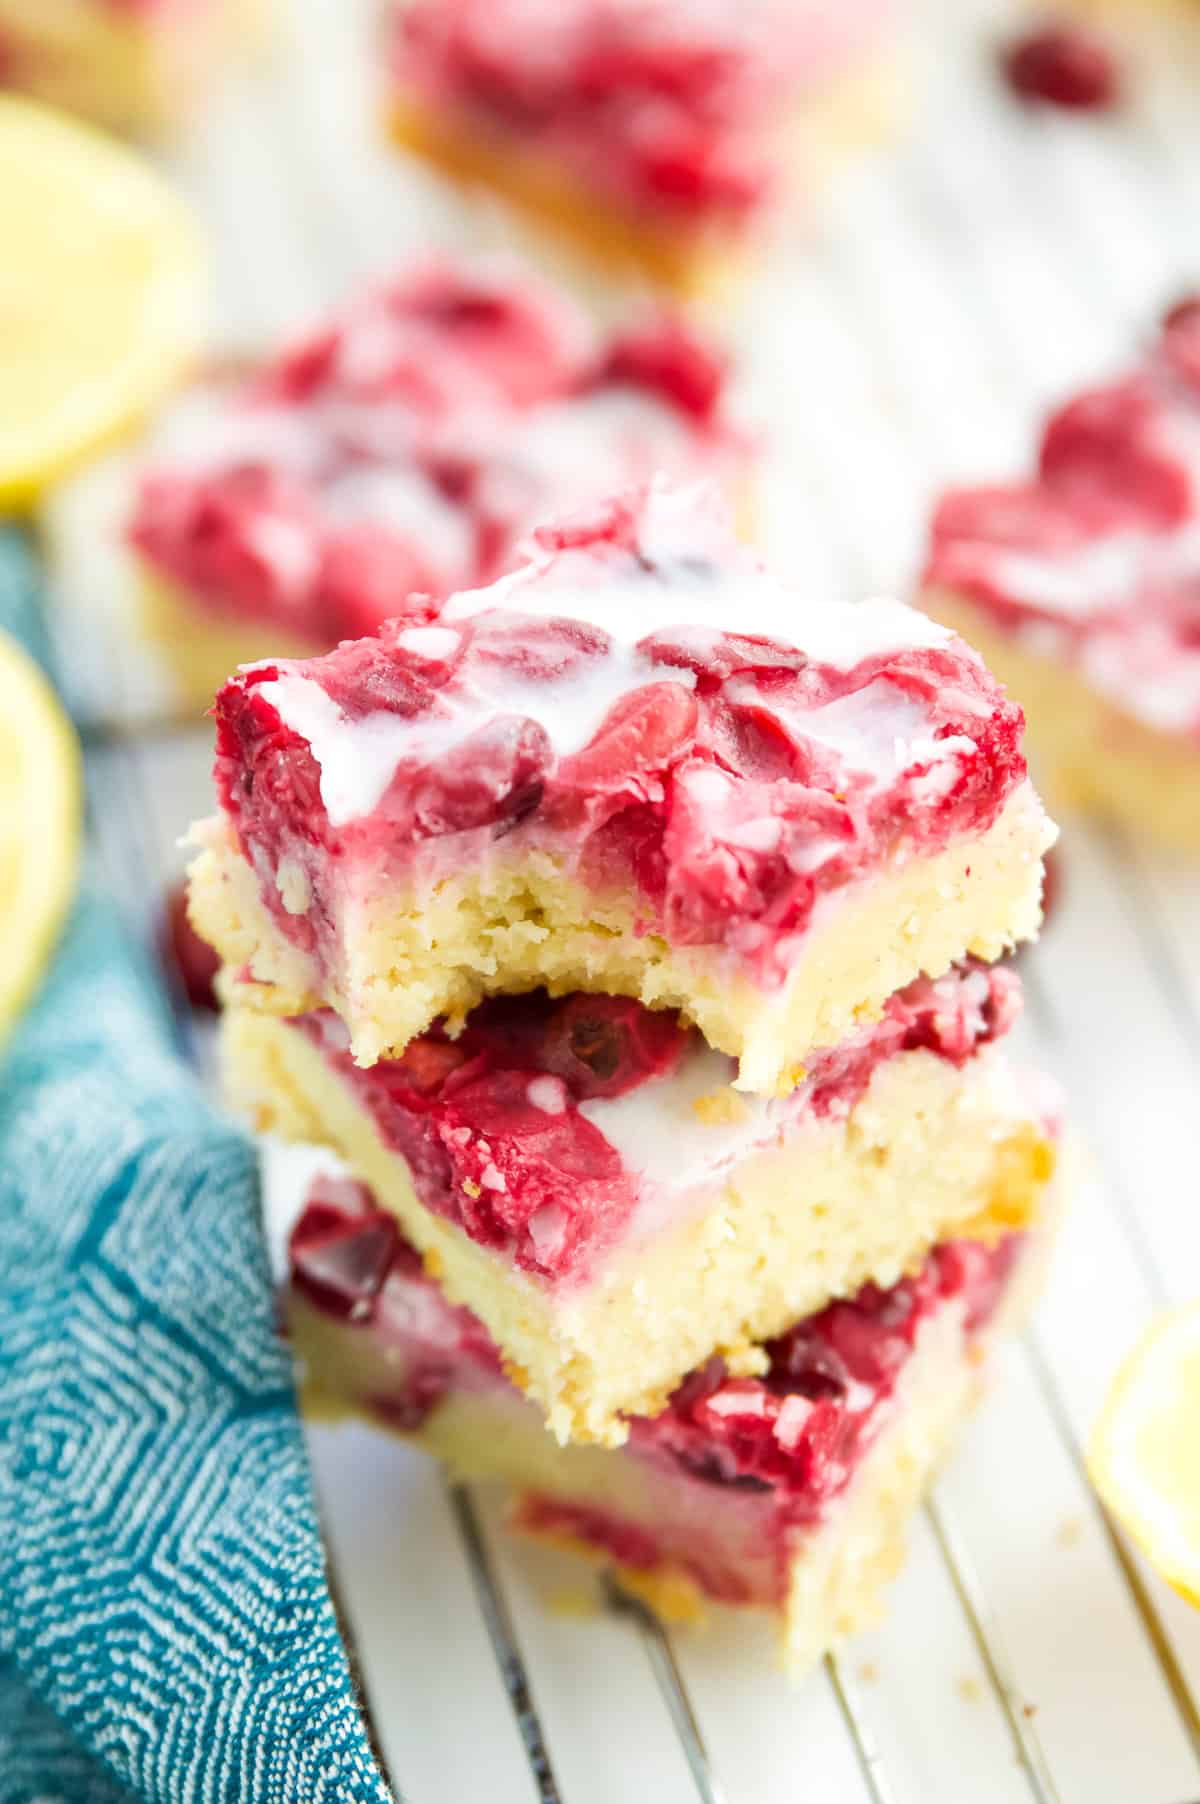 A stack of three gluten free lemon bars with cranberry and the top bar has a bite out of it.